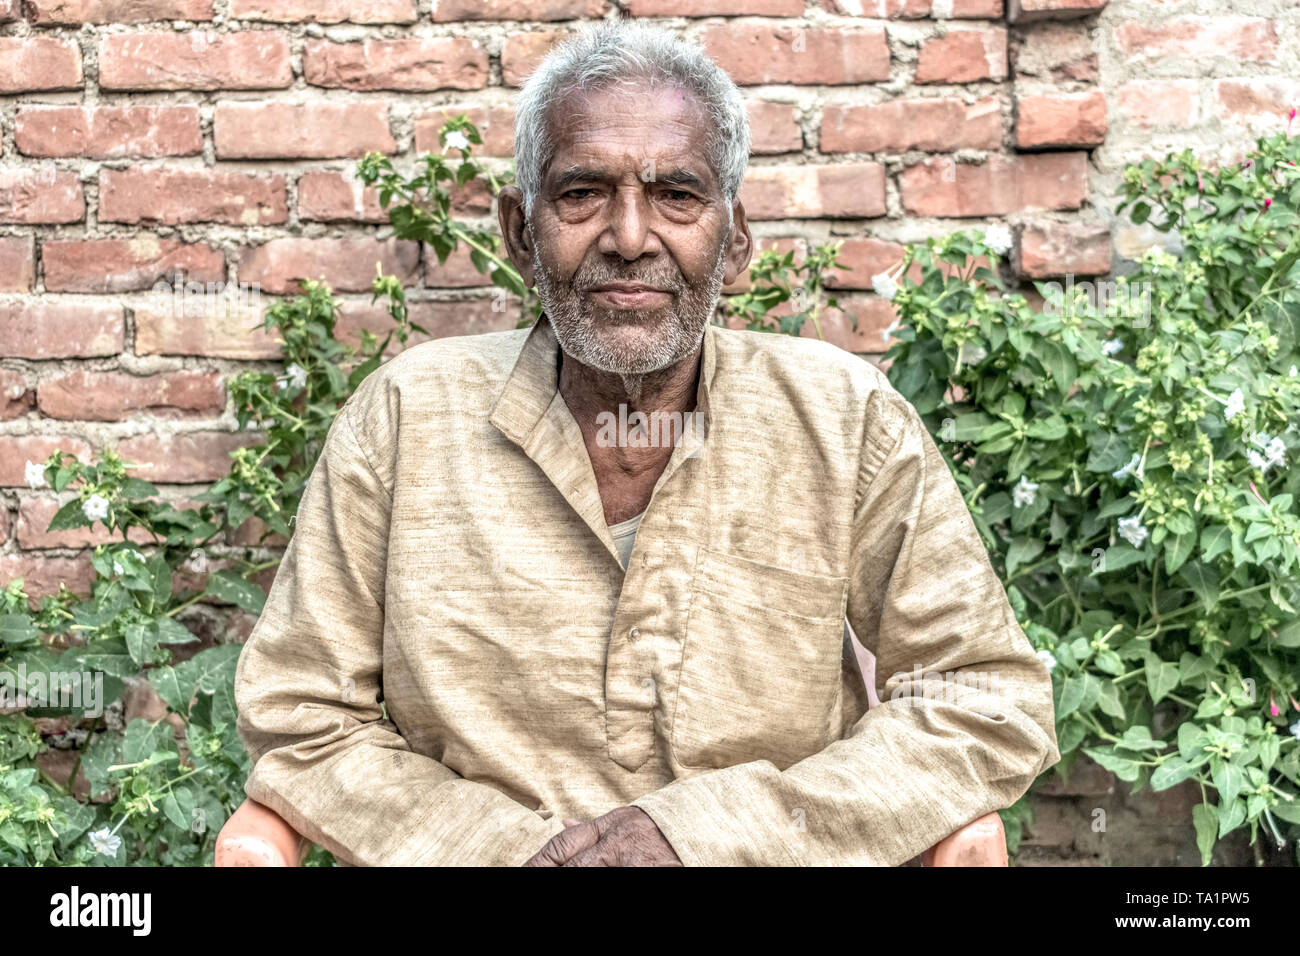 Portrait of Old aged Indian male in his 80s with white beard, wearing pale clothes, sitting relaxed in garden & leading satisfied post-retirement life Stock Photo